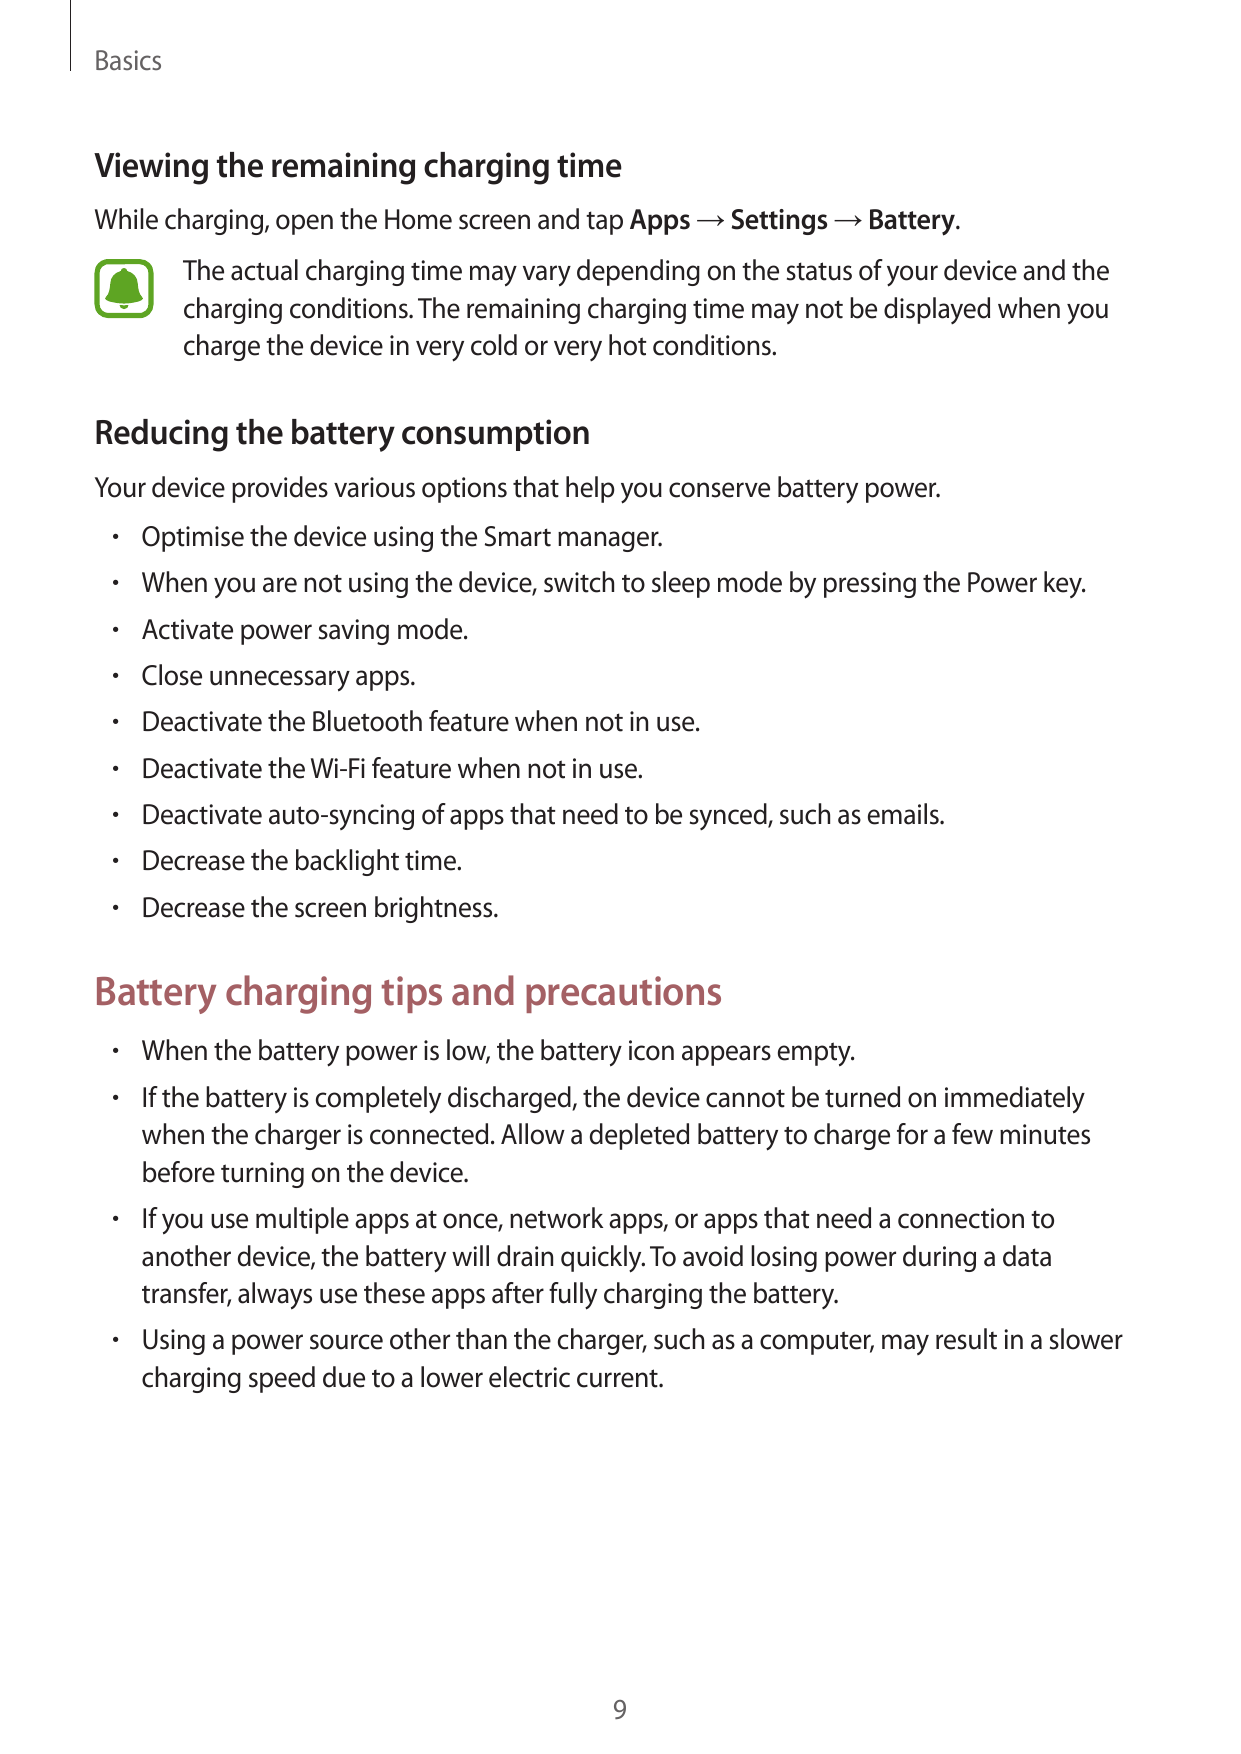 BasicsViewing the remaining charging timeWhile charging, open the Home screen and tap Apps → Settings → Battery.The actual charg